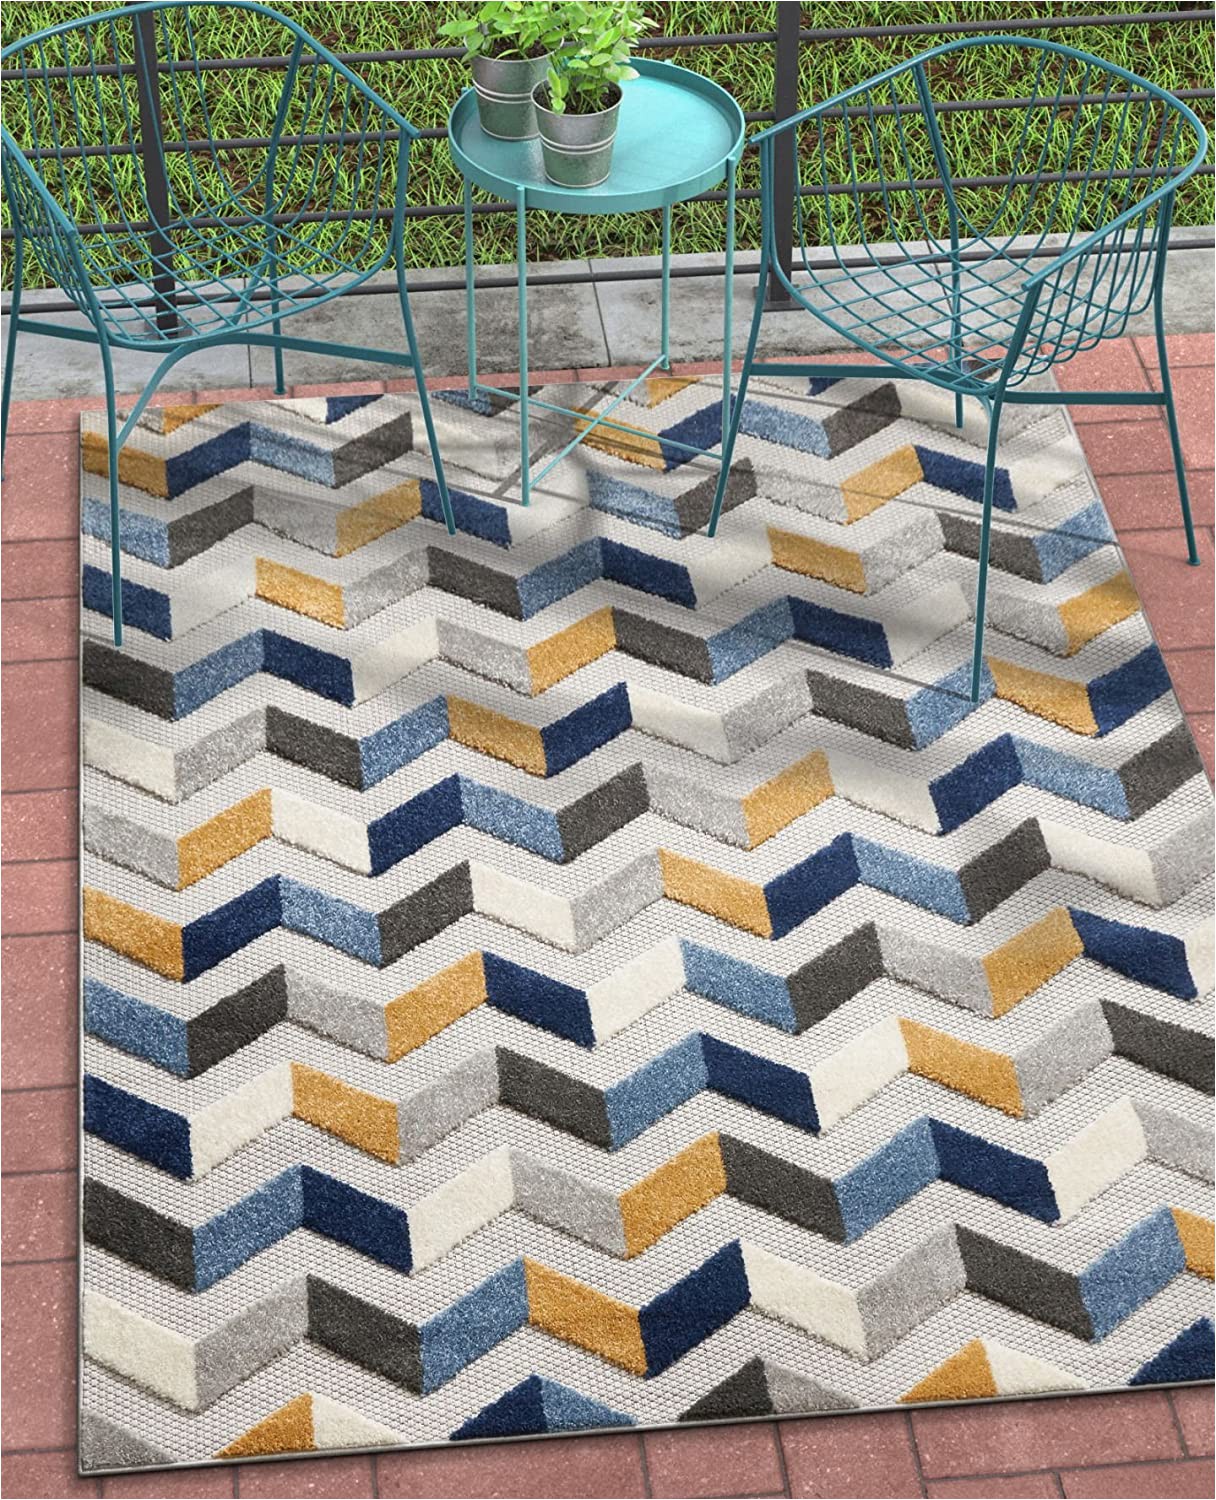 5 X 7 Outdoor area Rugs Well Woven Maui Blue Indoor Outdoor Chevron area Rug 5×7 5 3" X 7 3" High Traffic Stain Resistant Modern Geometric Carpet